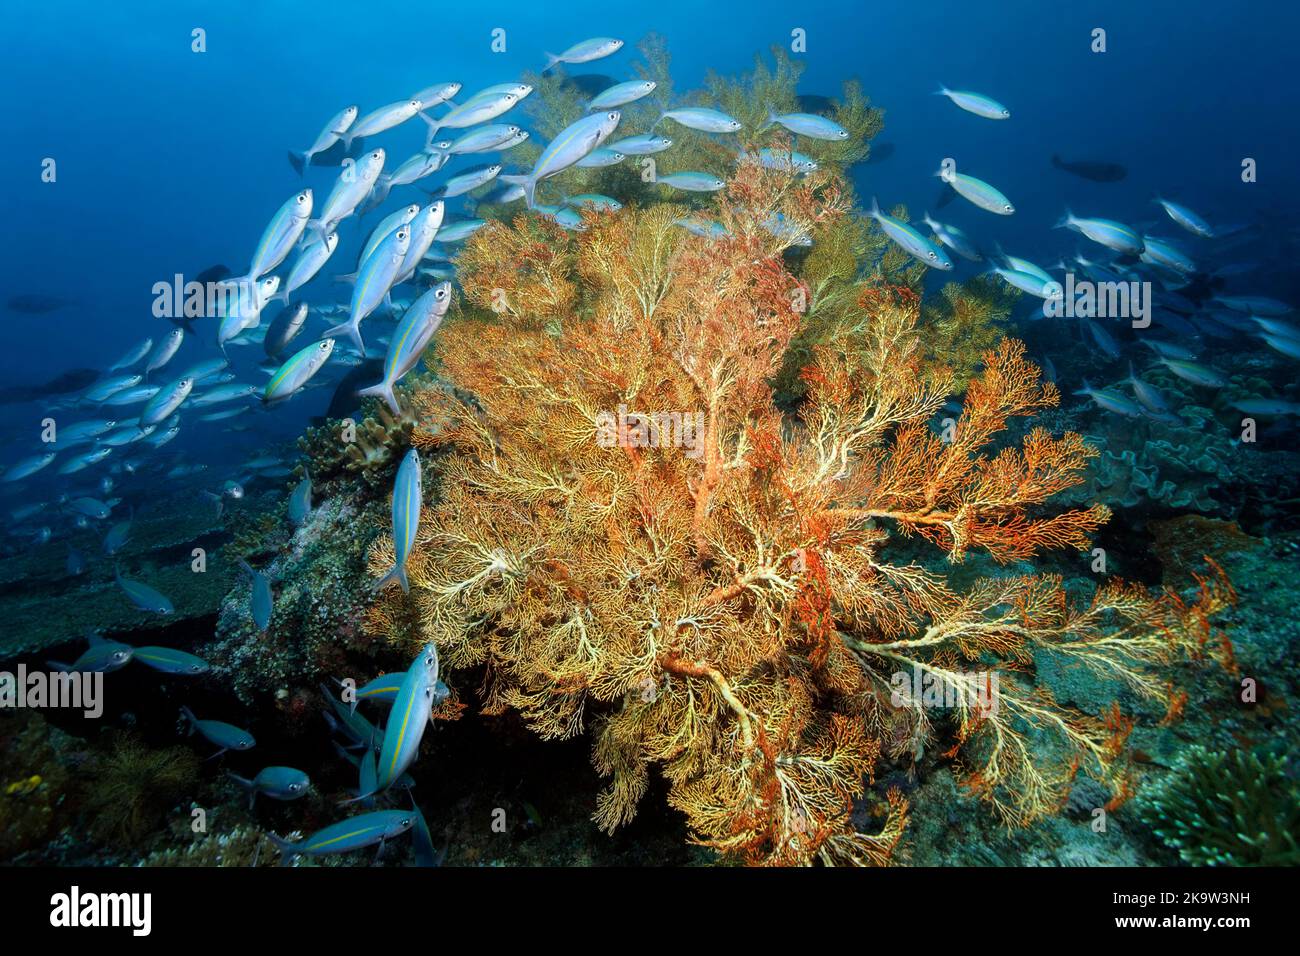 Shoal of goldband fusilier (Caesio caerulaurea) or golden-striped fusiliers swimming over coral reef with large giant sea fan (Annella mollis) Stock Photo